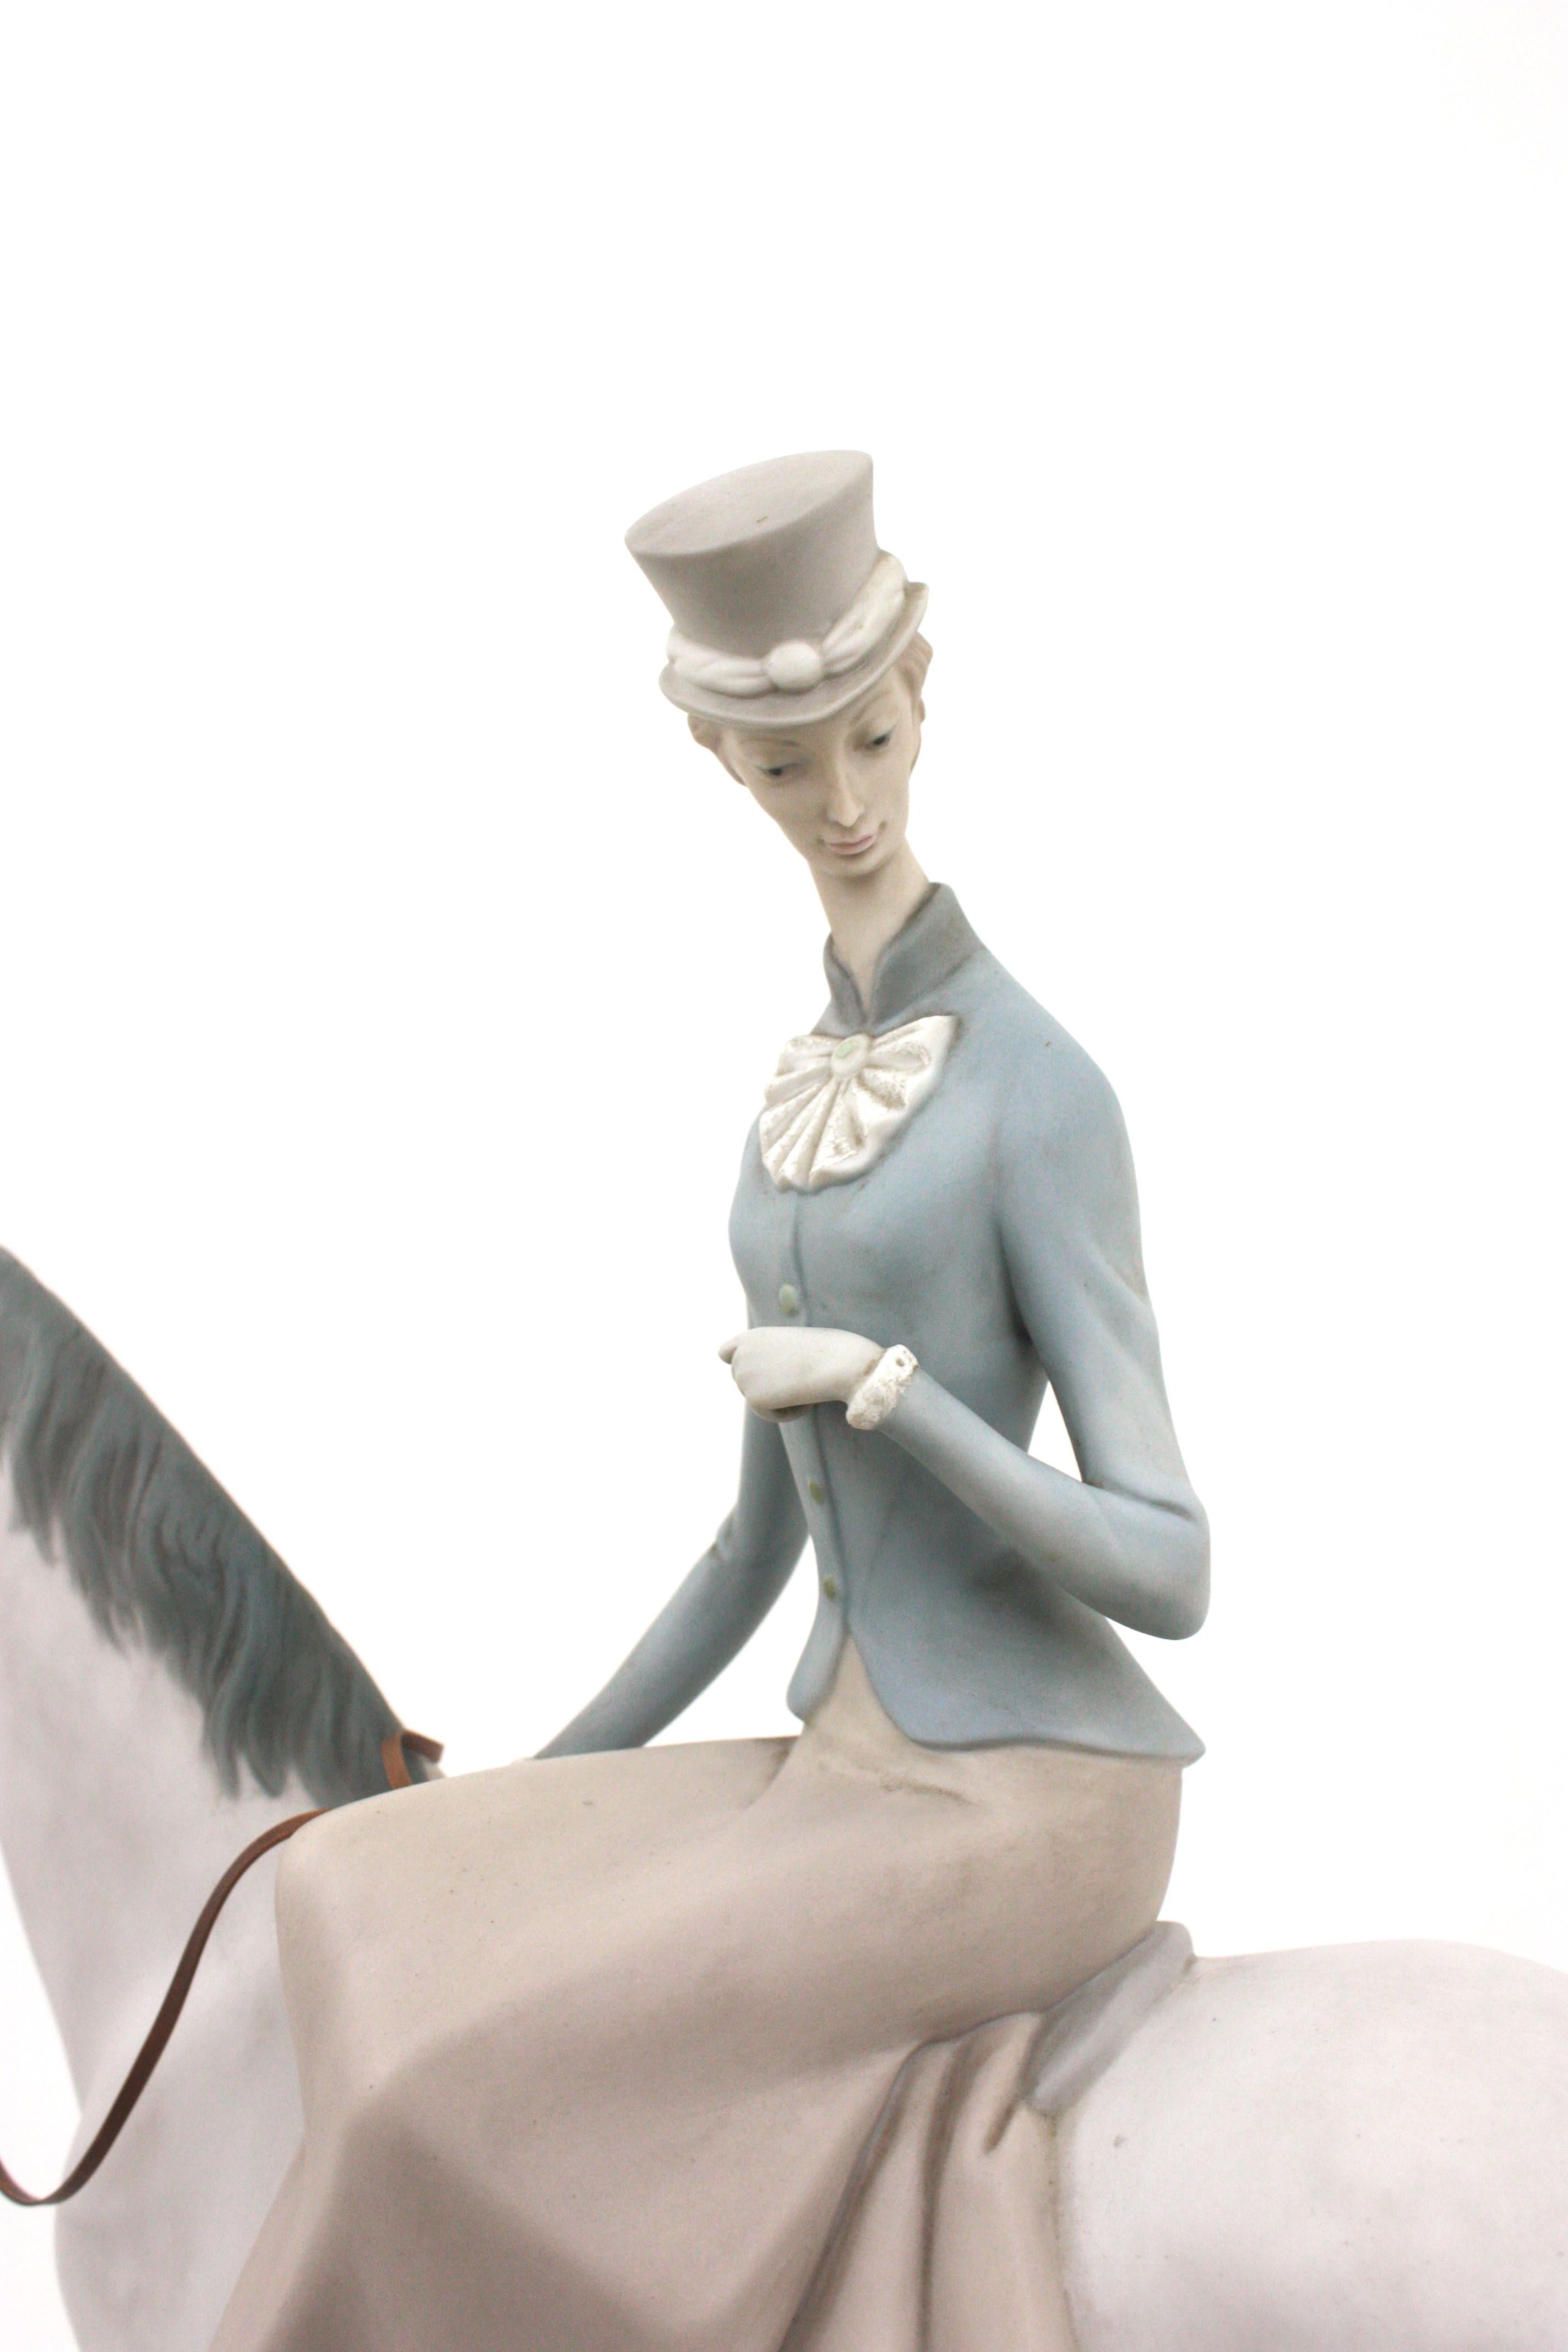 Large Spanish Horse Woman Porcelain Sculpture by Lladro, 1960s For Sale 6